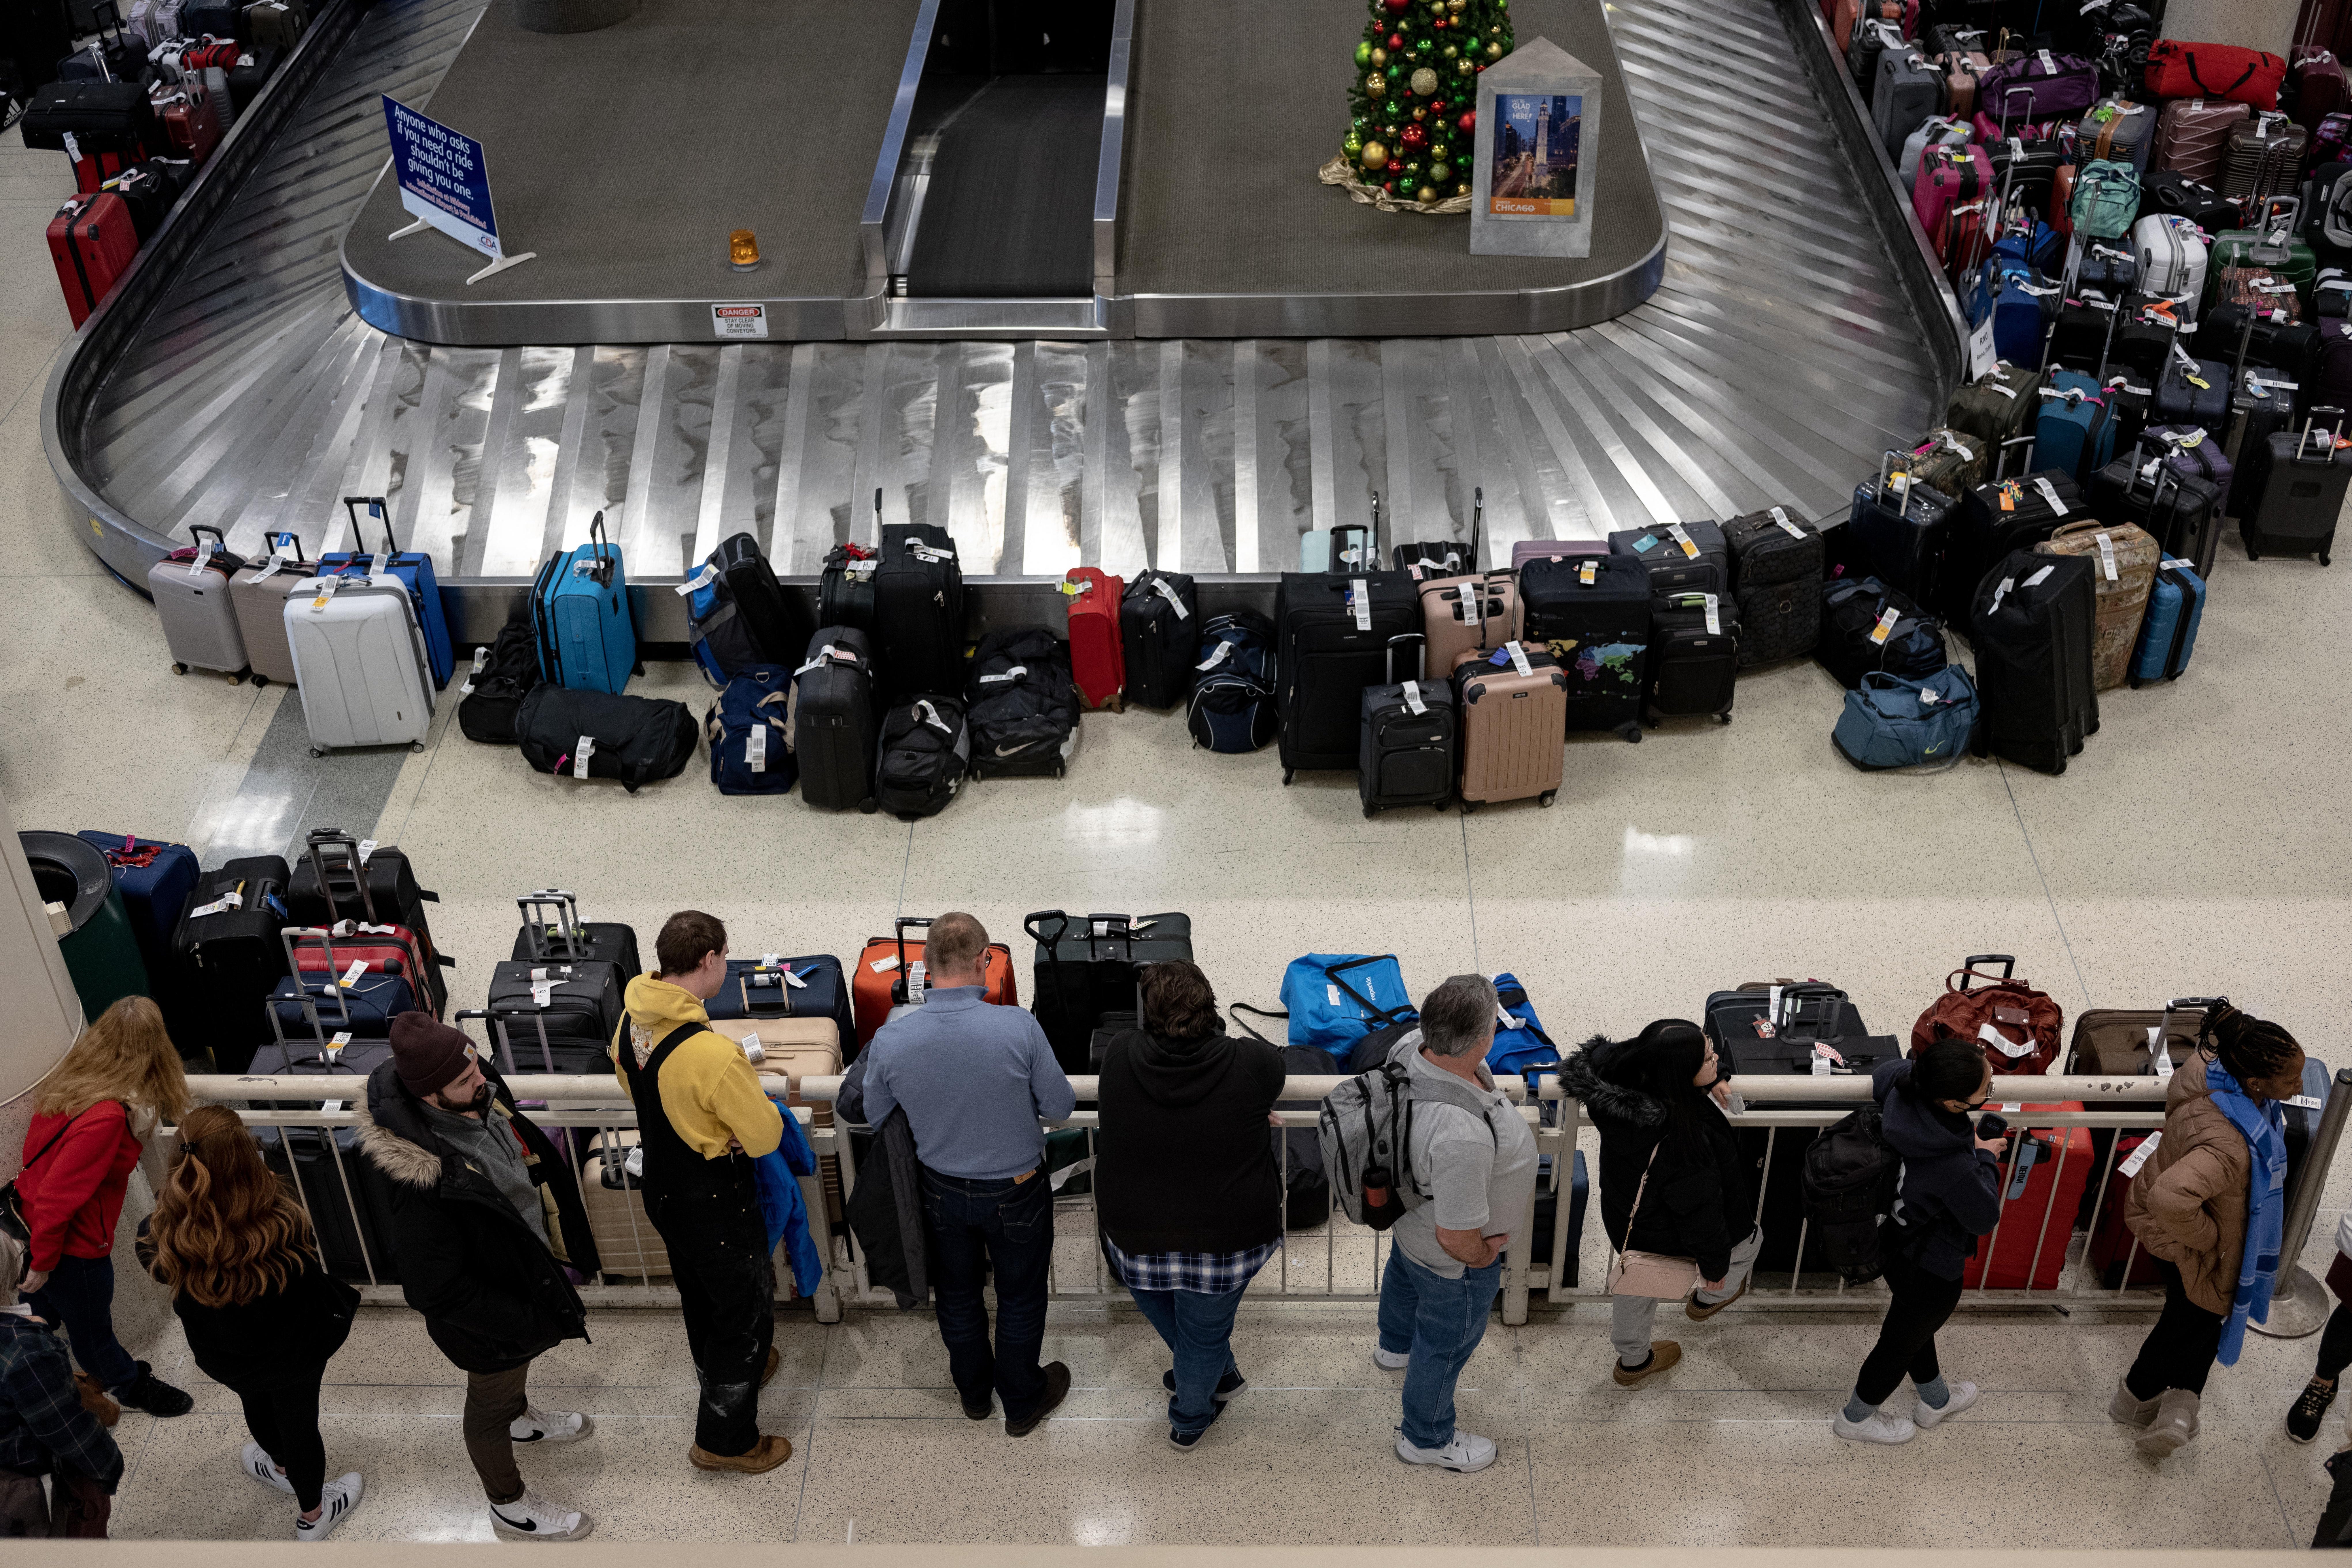 An aerial shot of customers lined up in front of a blocked off baggage claim band surrounded by luggage.